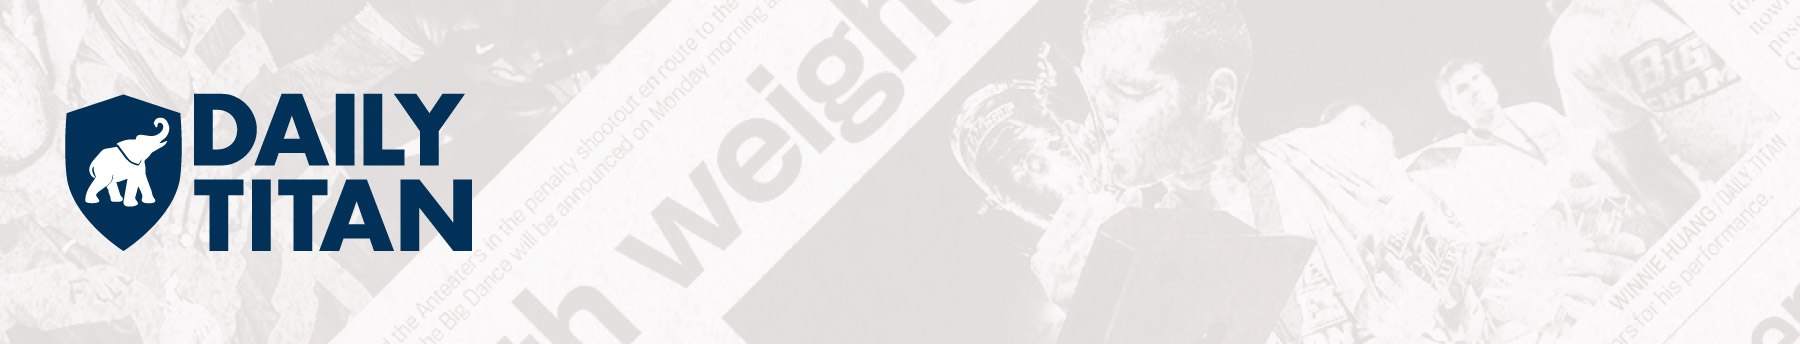 Banner of main Daily Titan logo with a faded background of a newspaper scan.